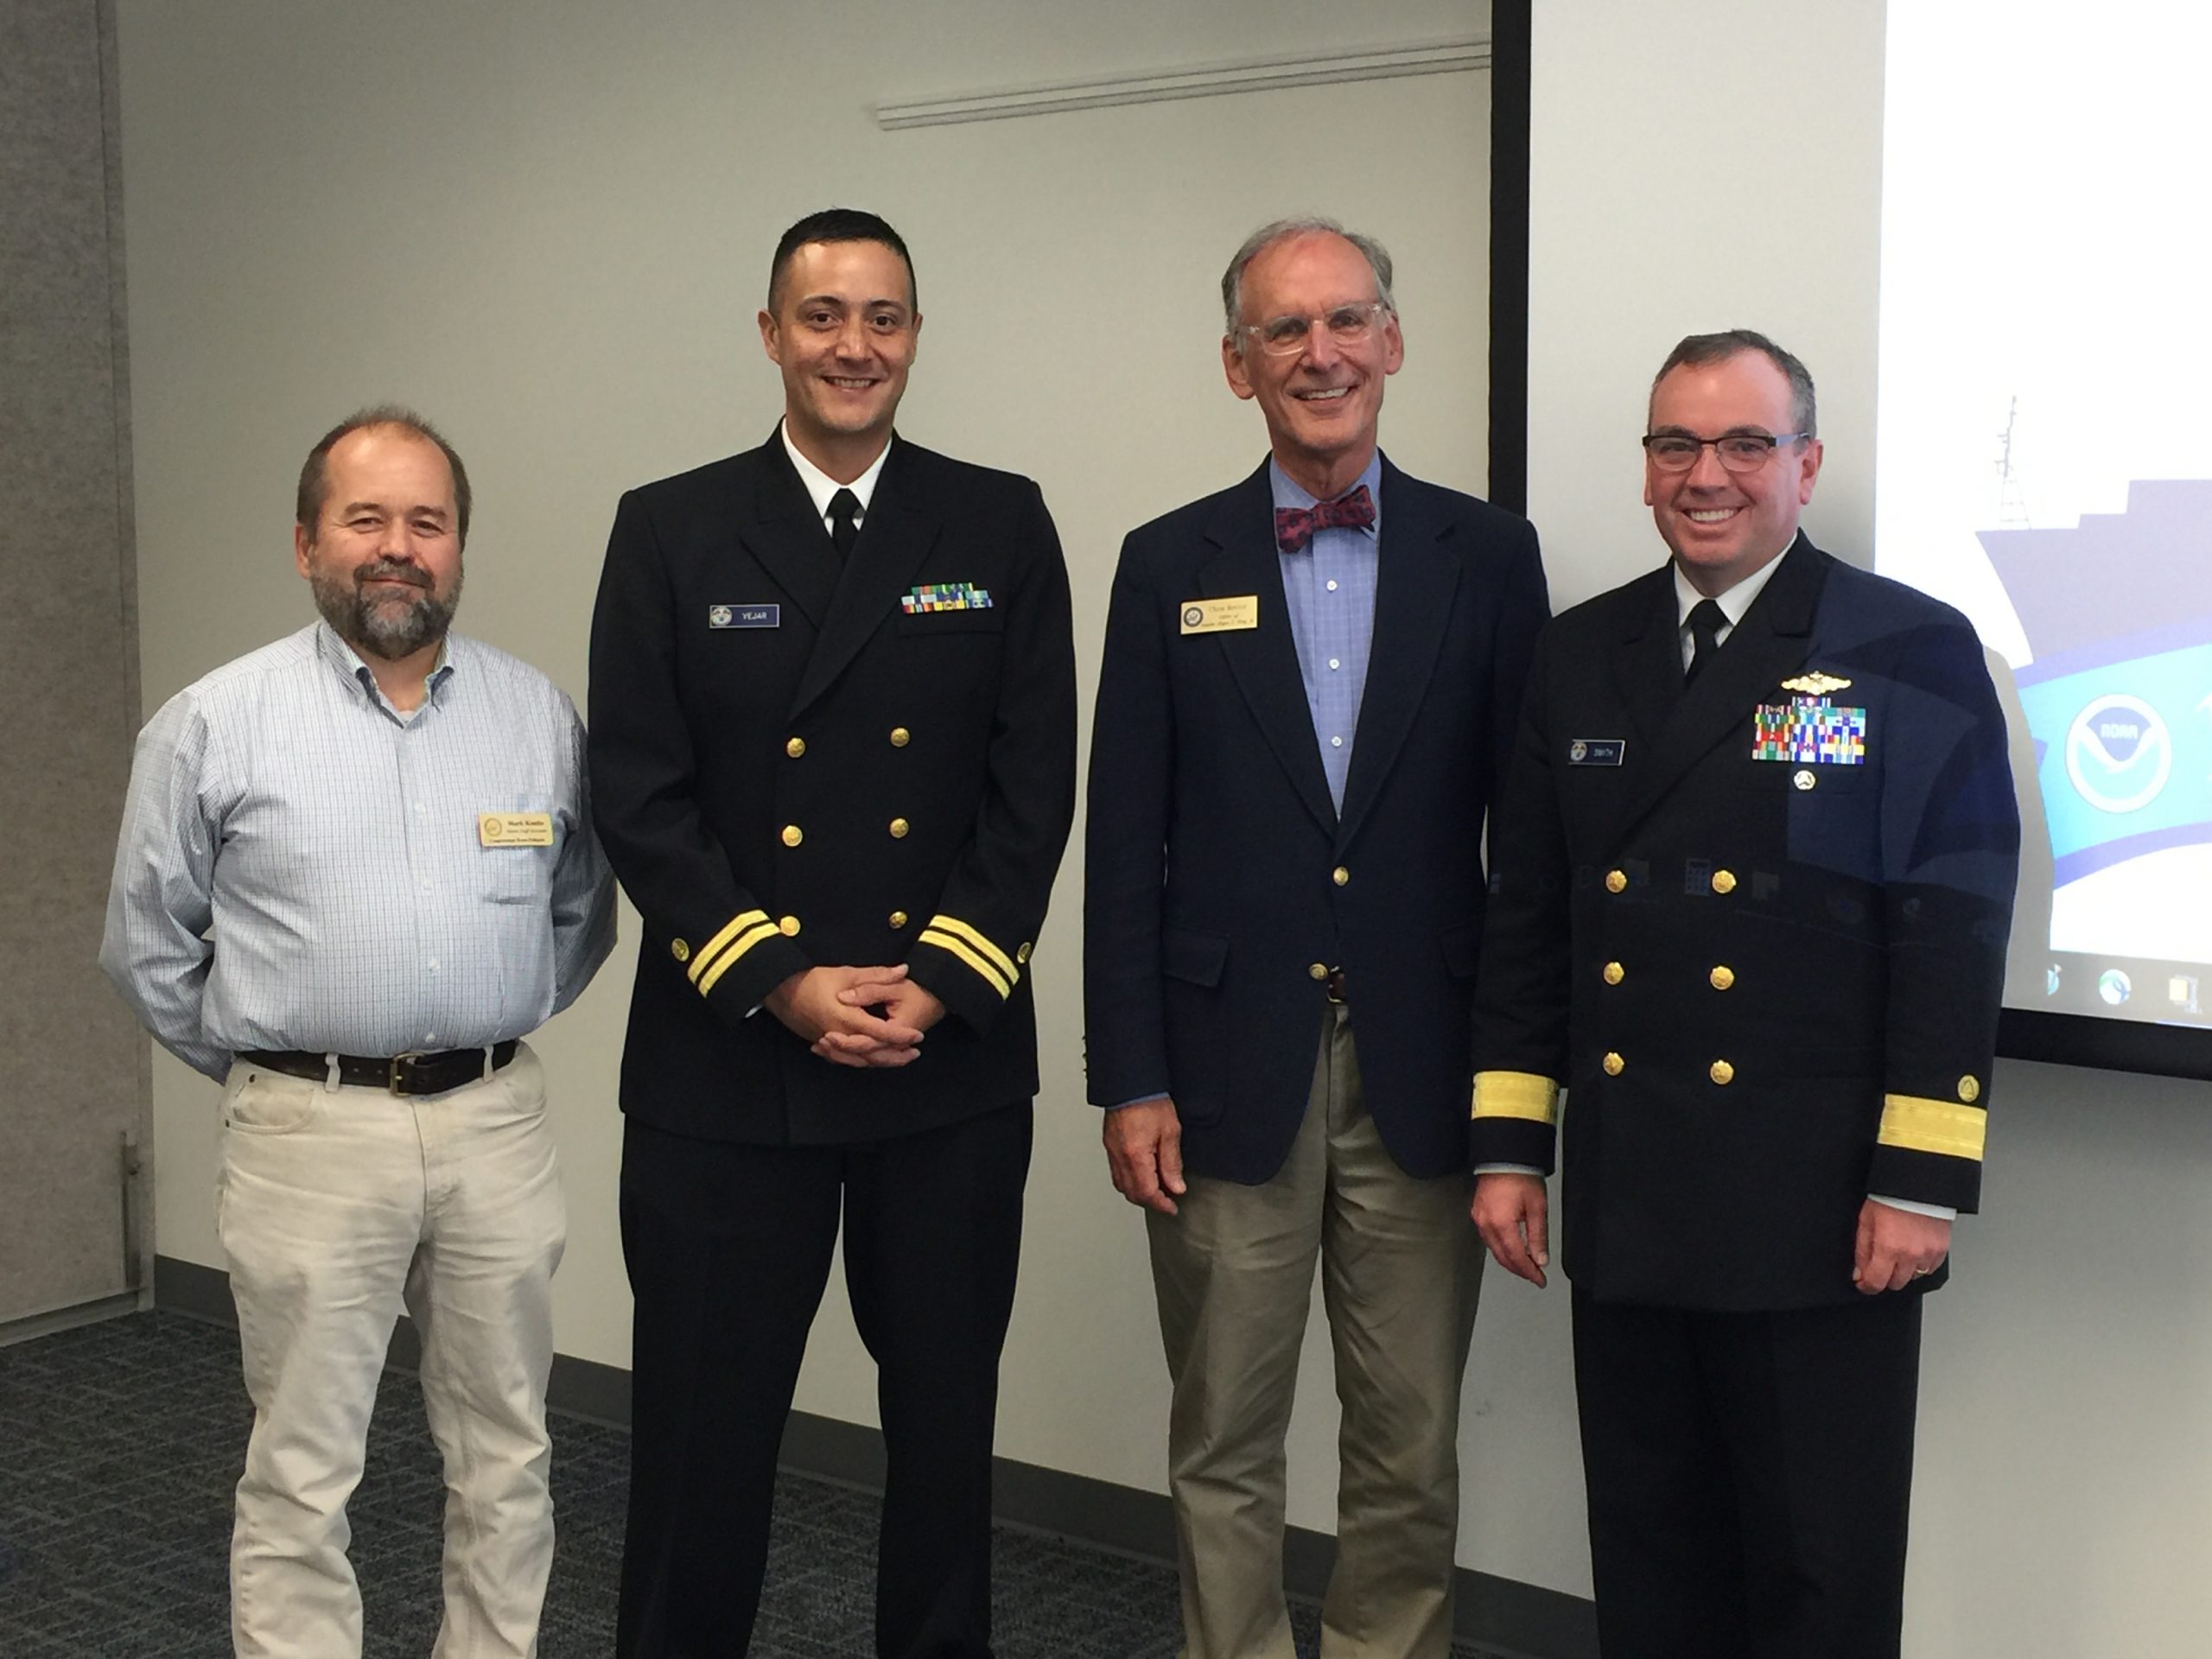 Mark Kontio, Maine staff assistant for Congressman Bruce Poliquin, Lt. David Vejar, northeast navigation manager, Chris Rector, regional representative for Senator Angus King, Rear Adm. Shep Smith, director of Office of Coast Survey, at the stakeholder meeting in Maine.